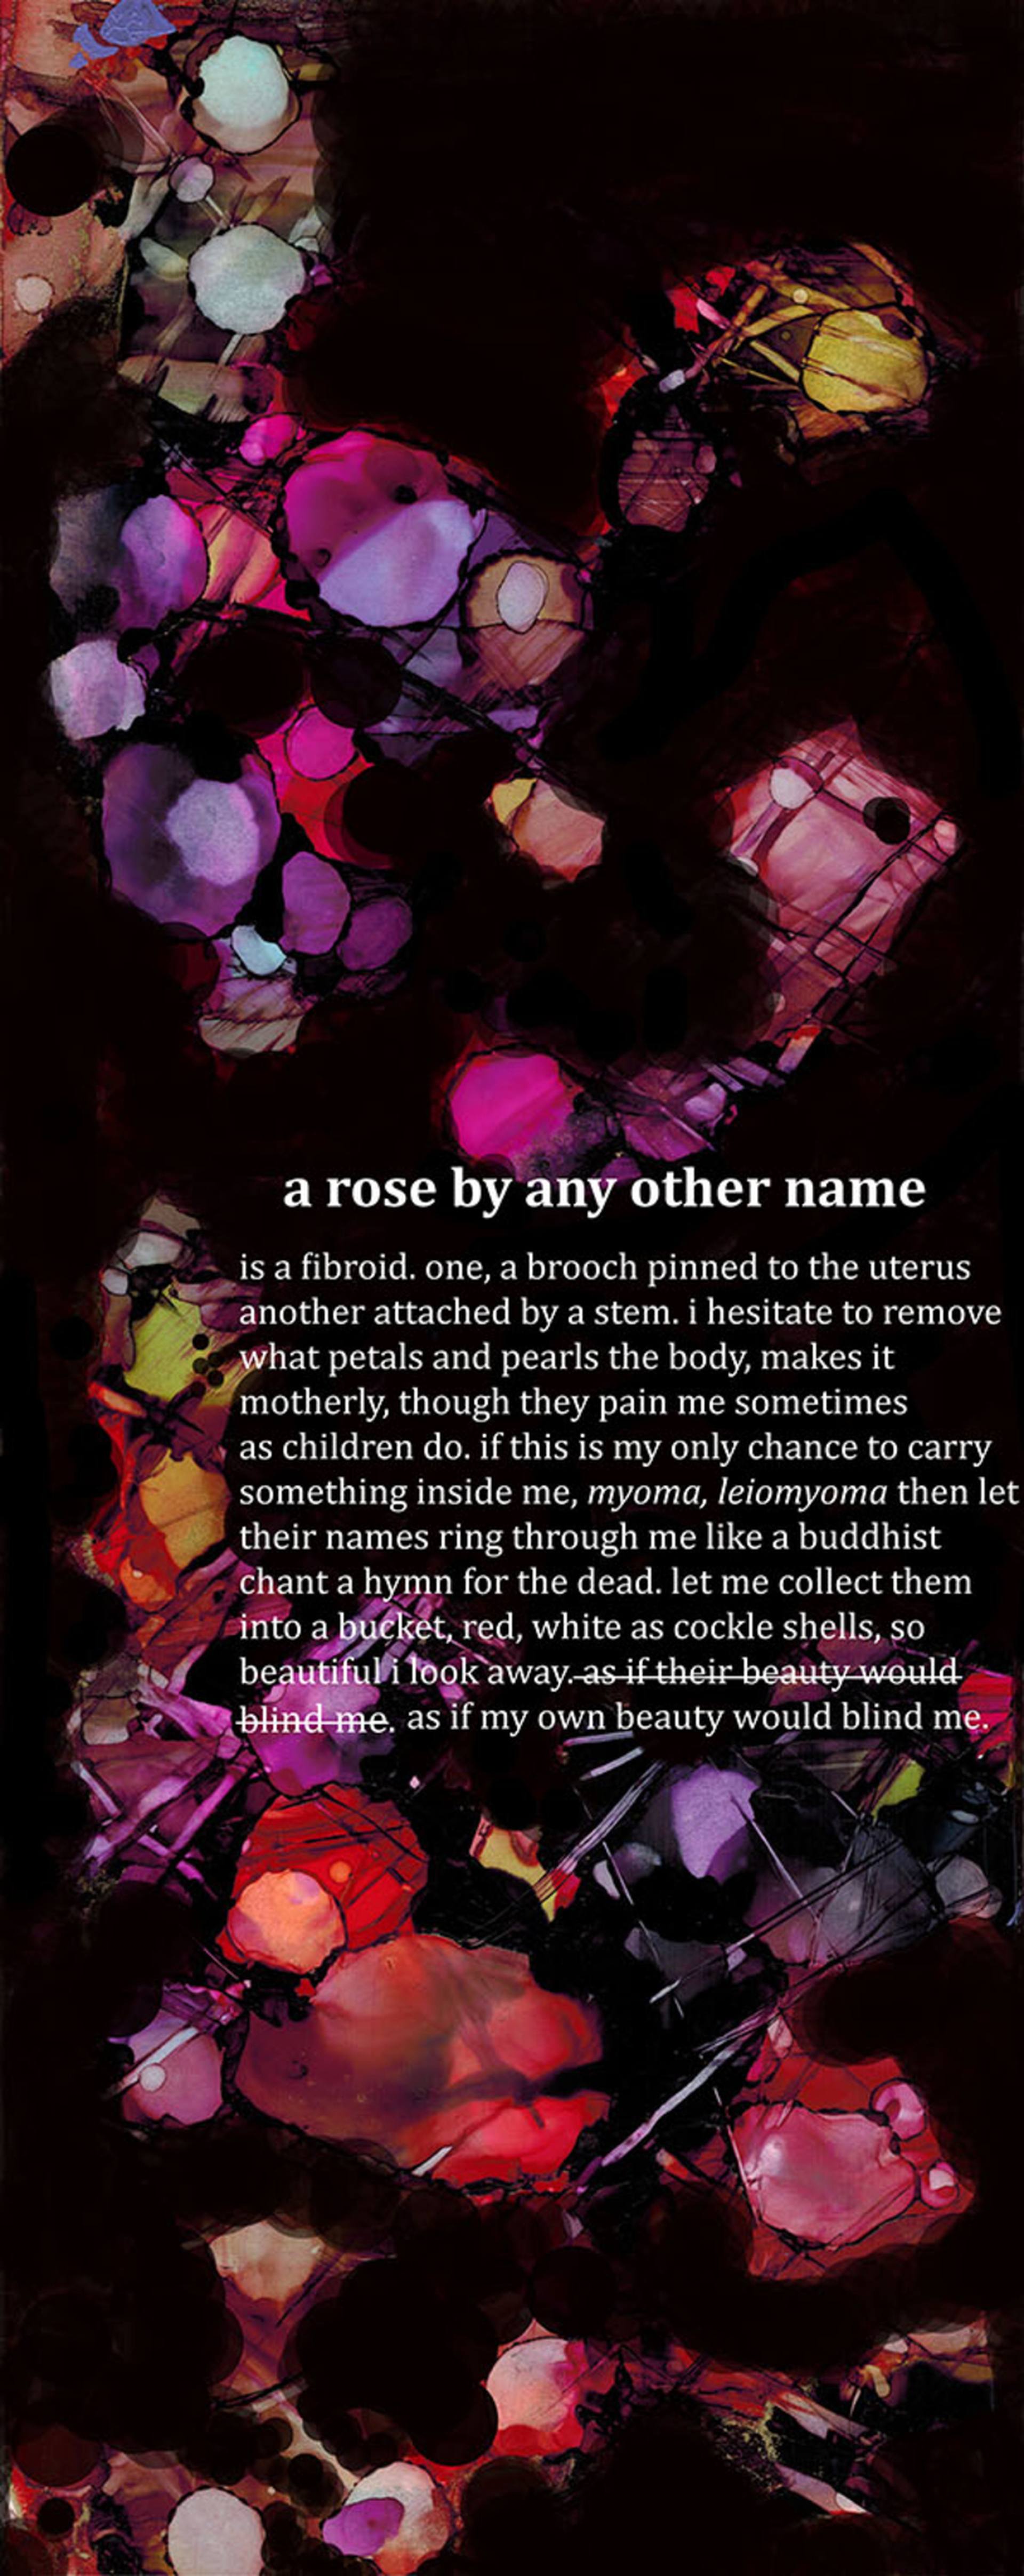 a rose by any other name is still a rose